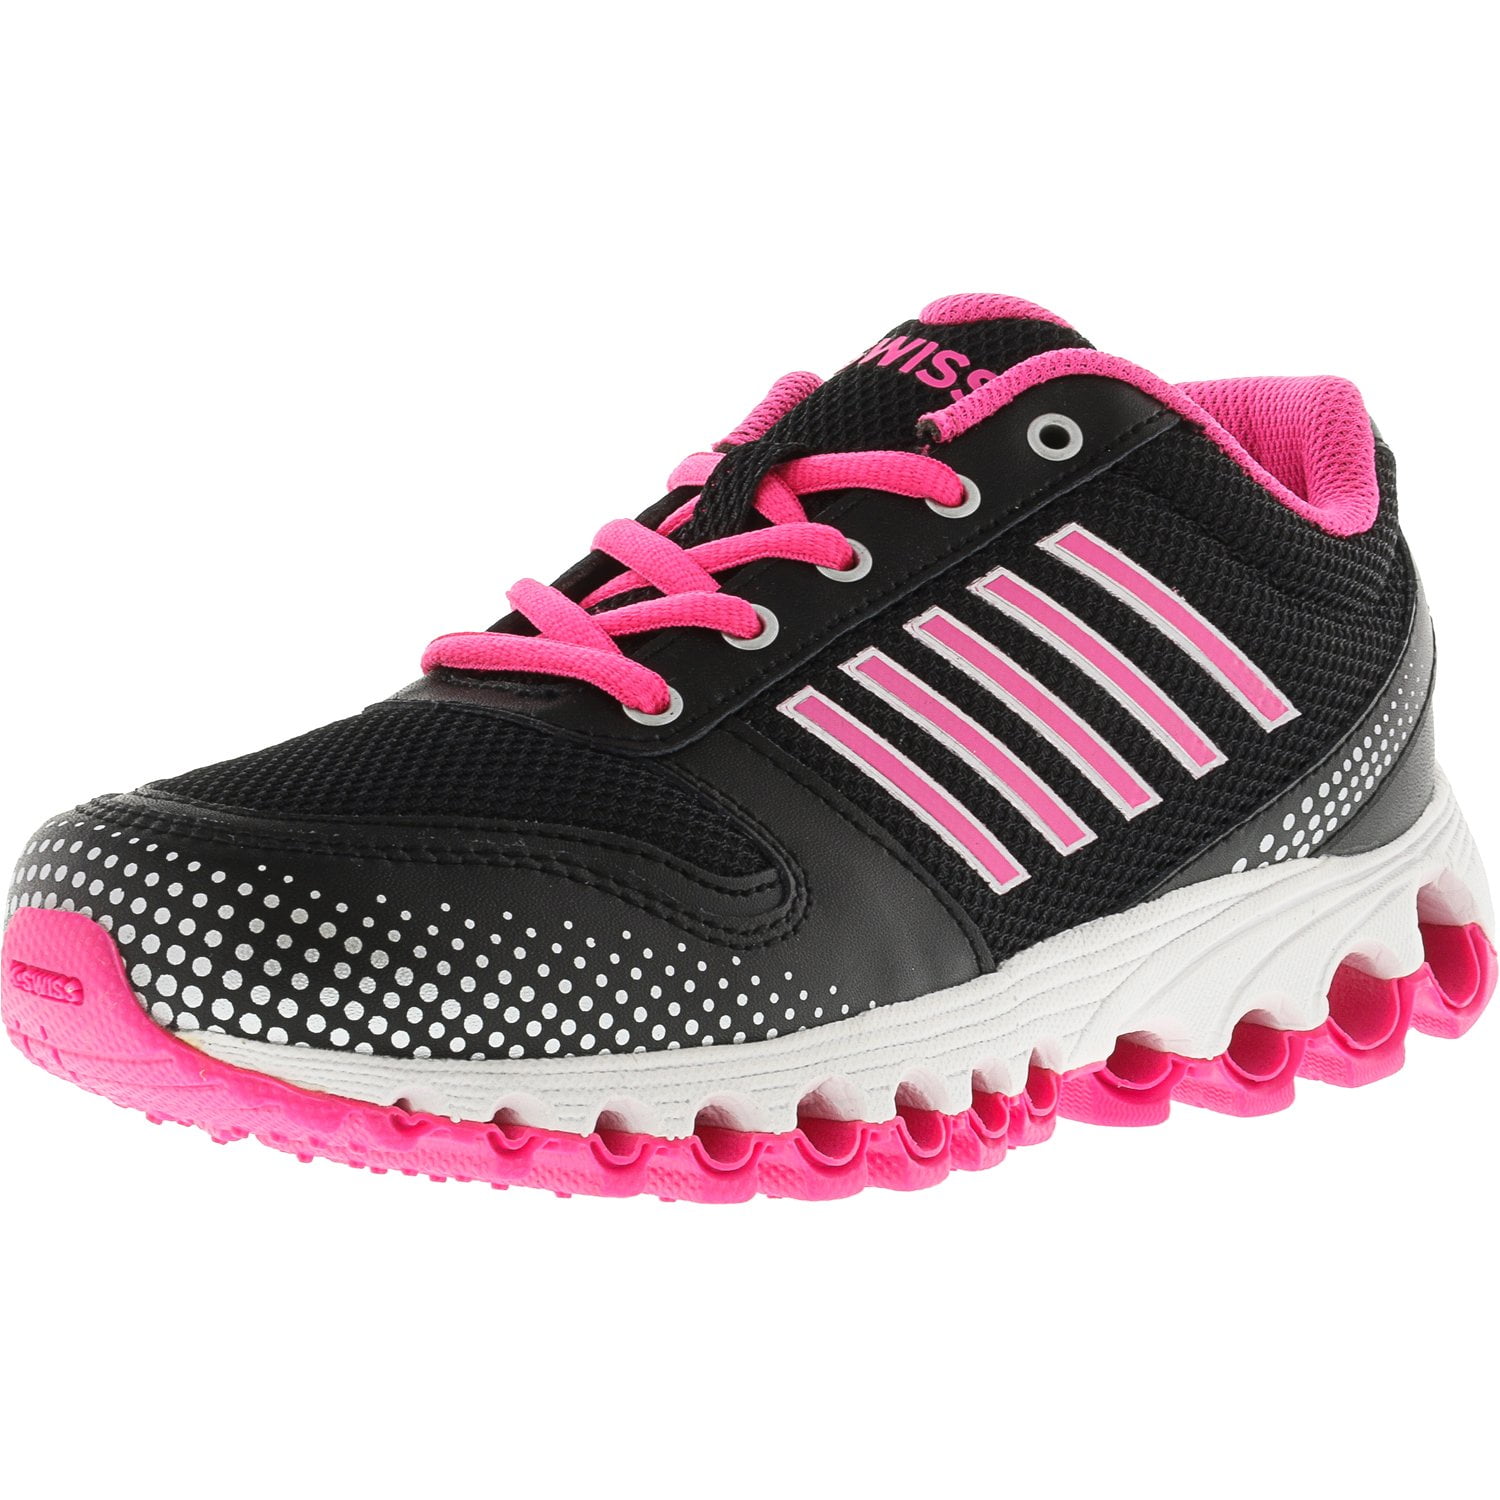 black and pink k swiss shoes